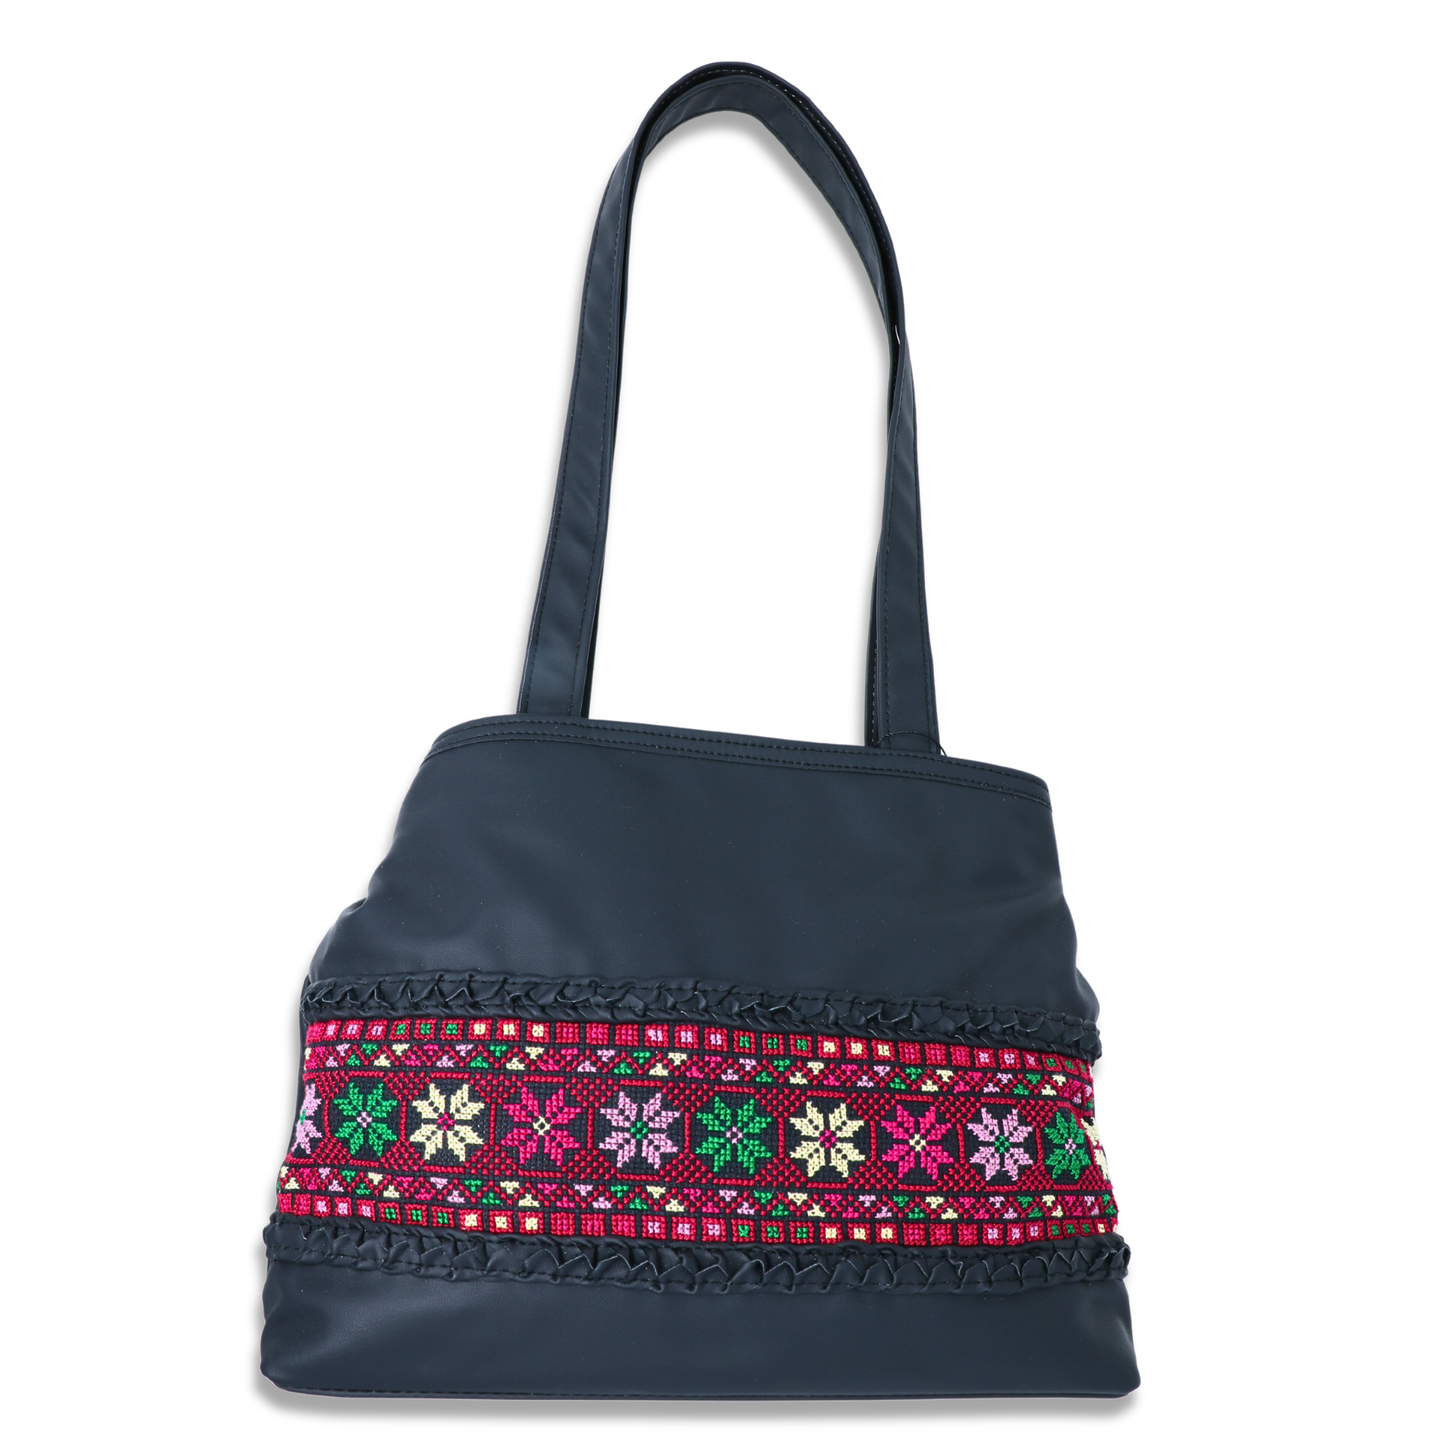 Colorful Artistry: Hand-Embroidered Balck Leather Tote Bag (33x15x27 cm), One Horizontal Strip, Middle